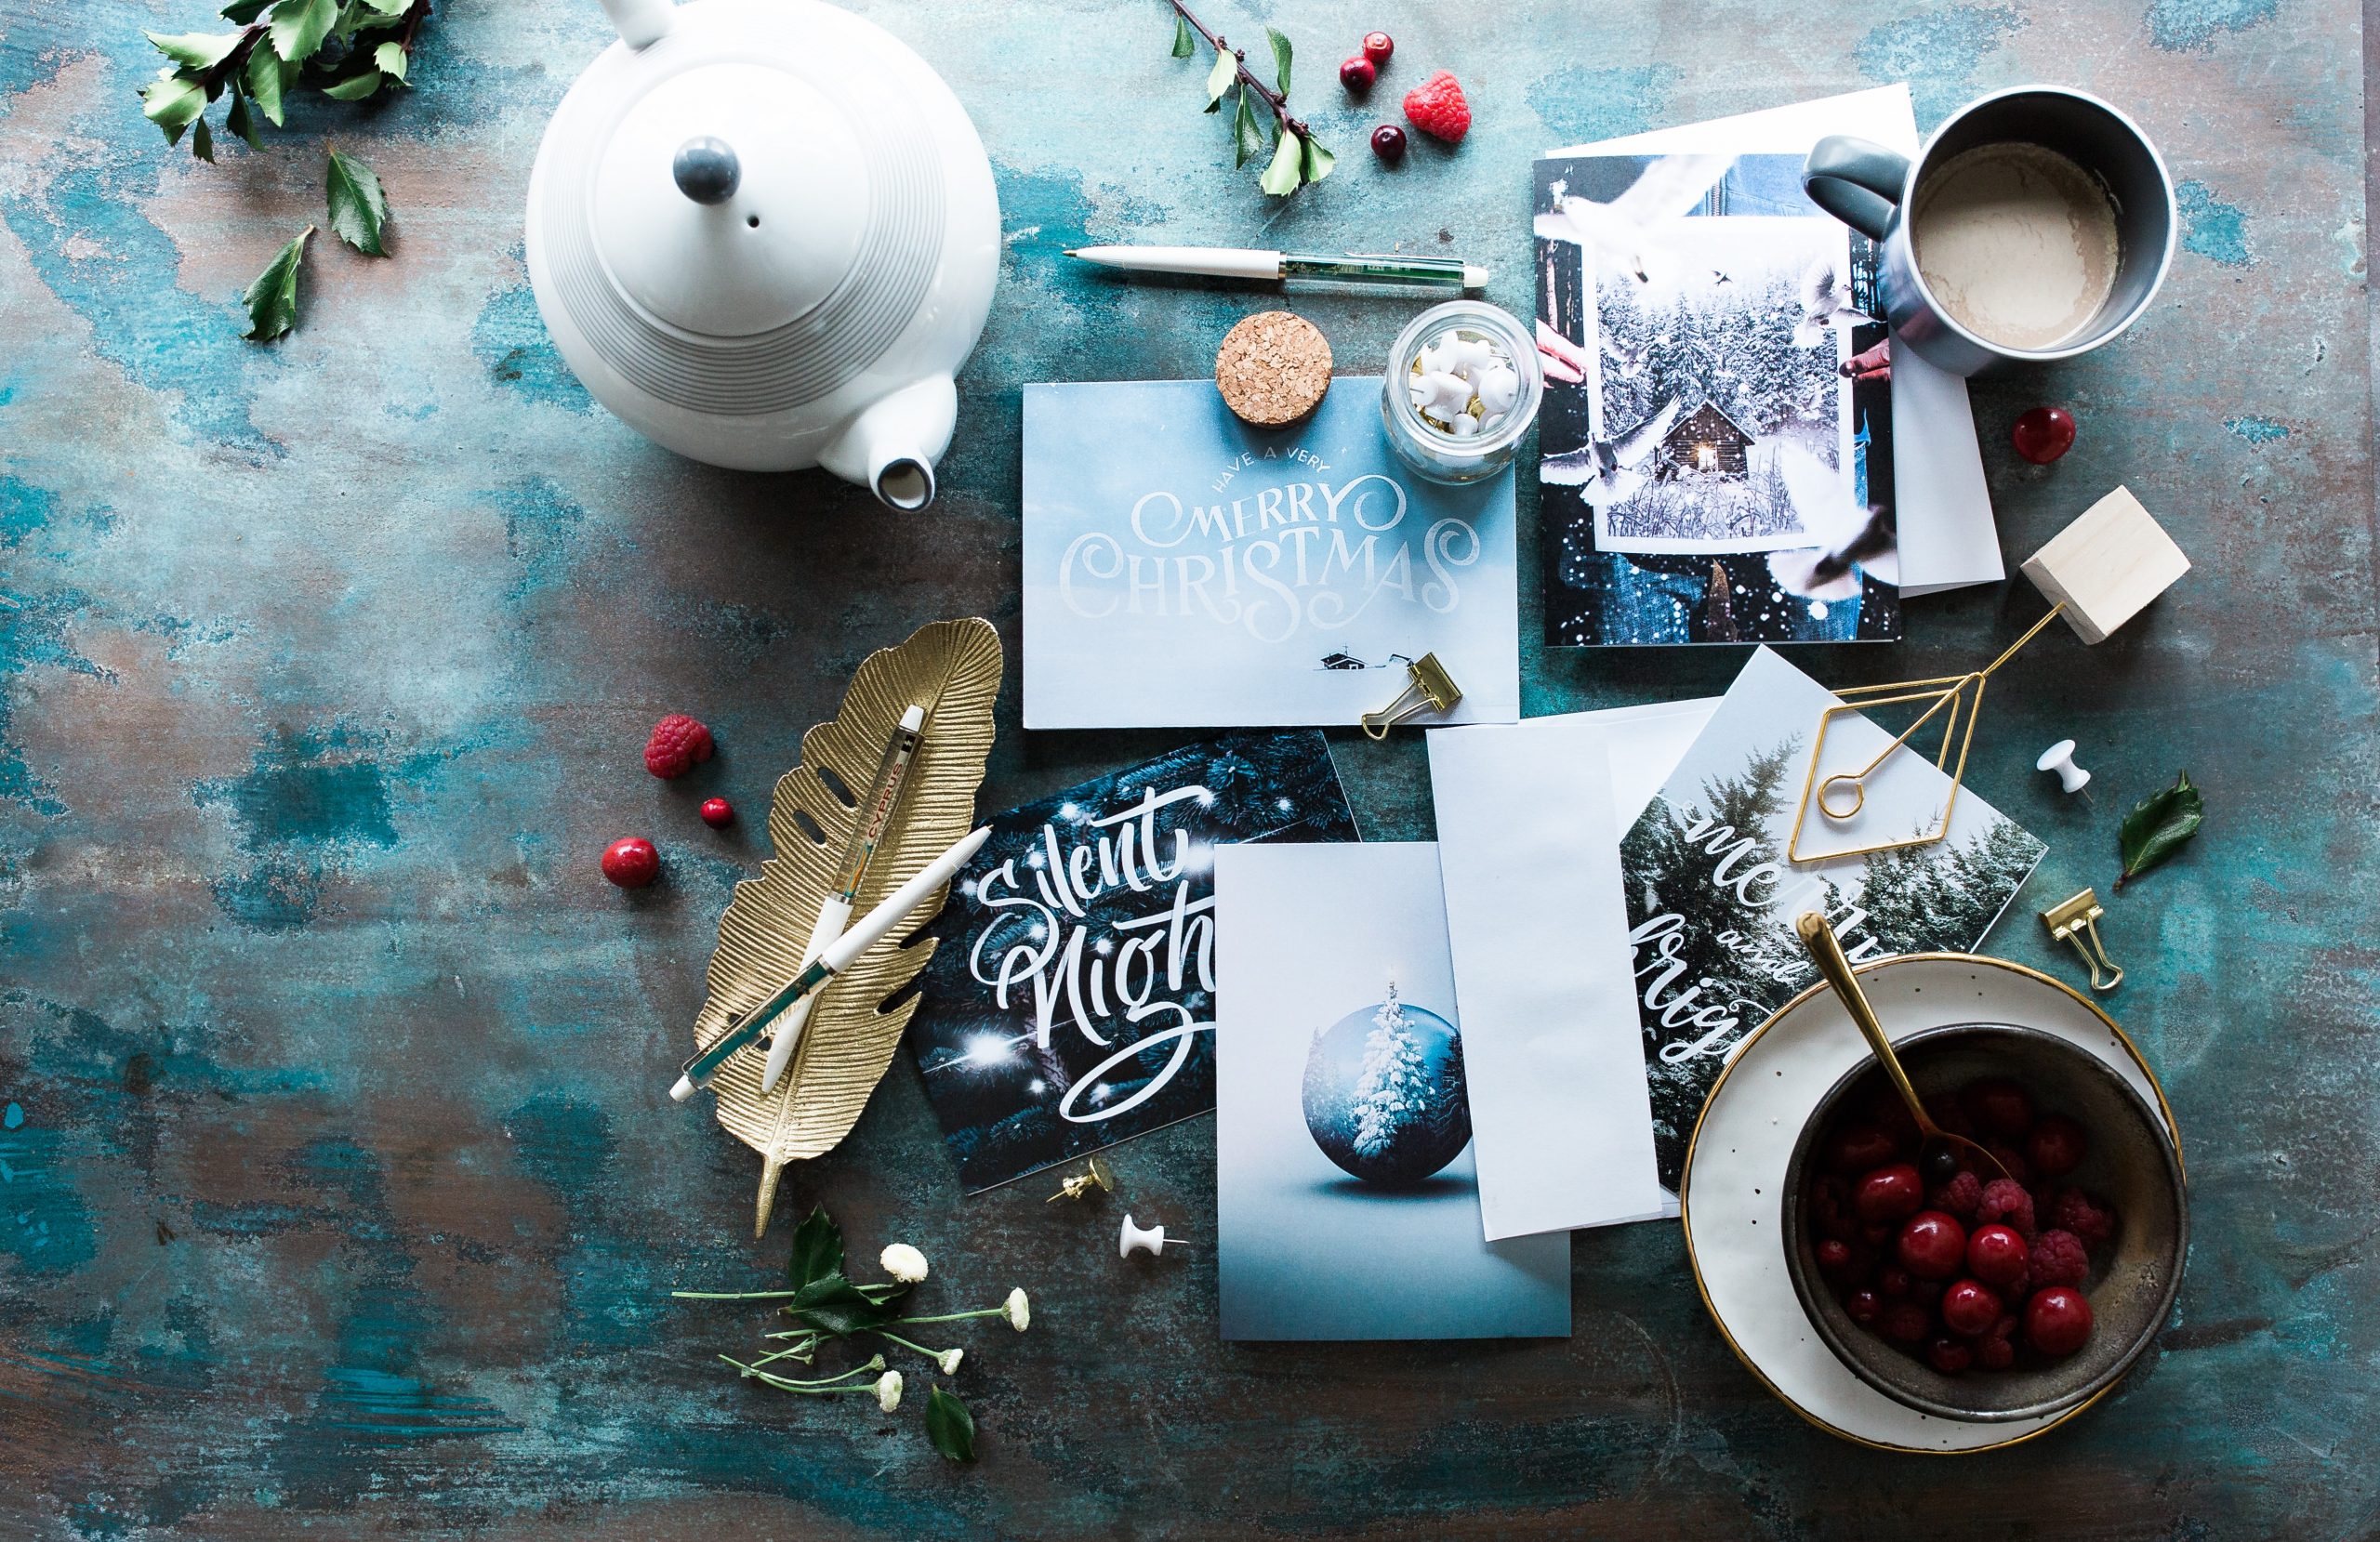 Image of holiday cards, pens and teapot with tea cup.